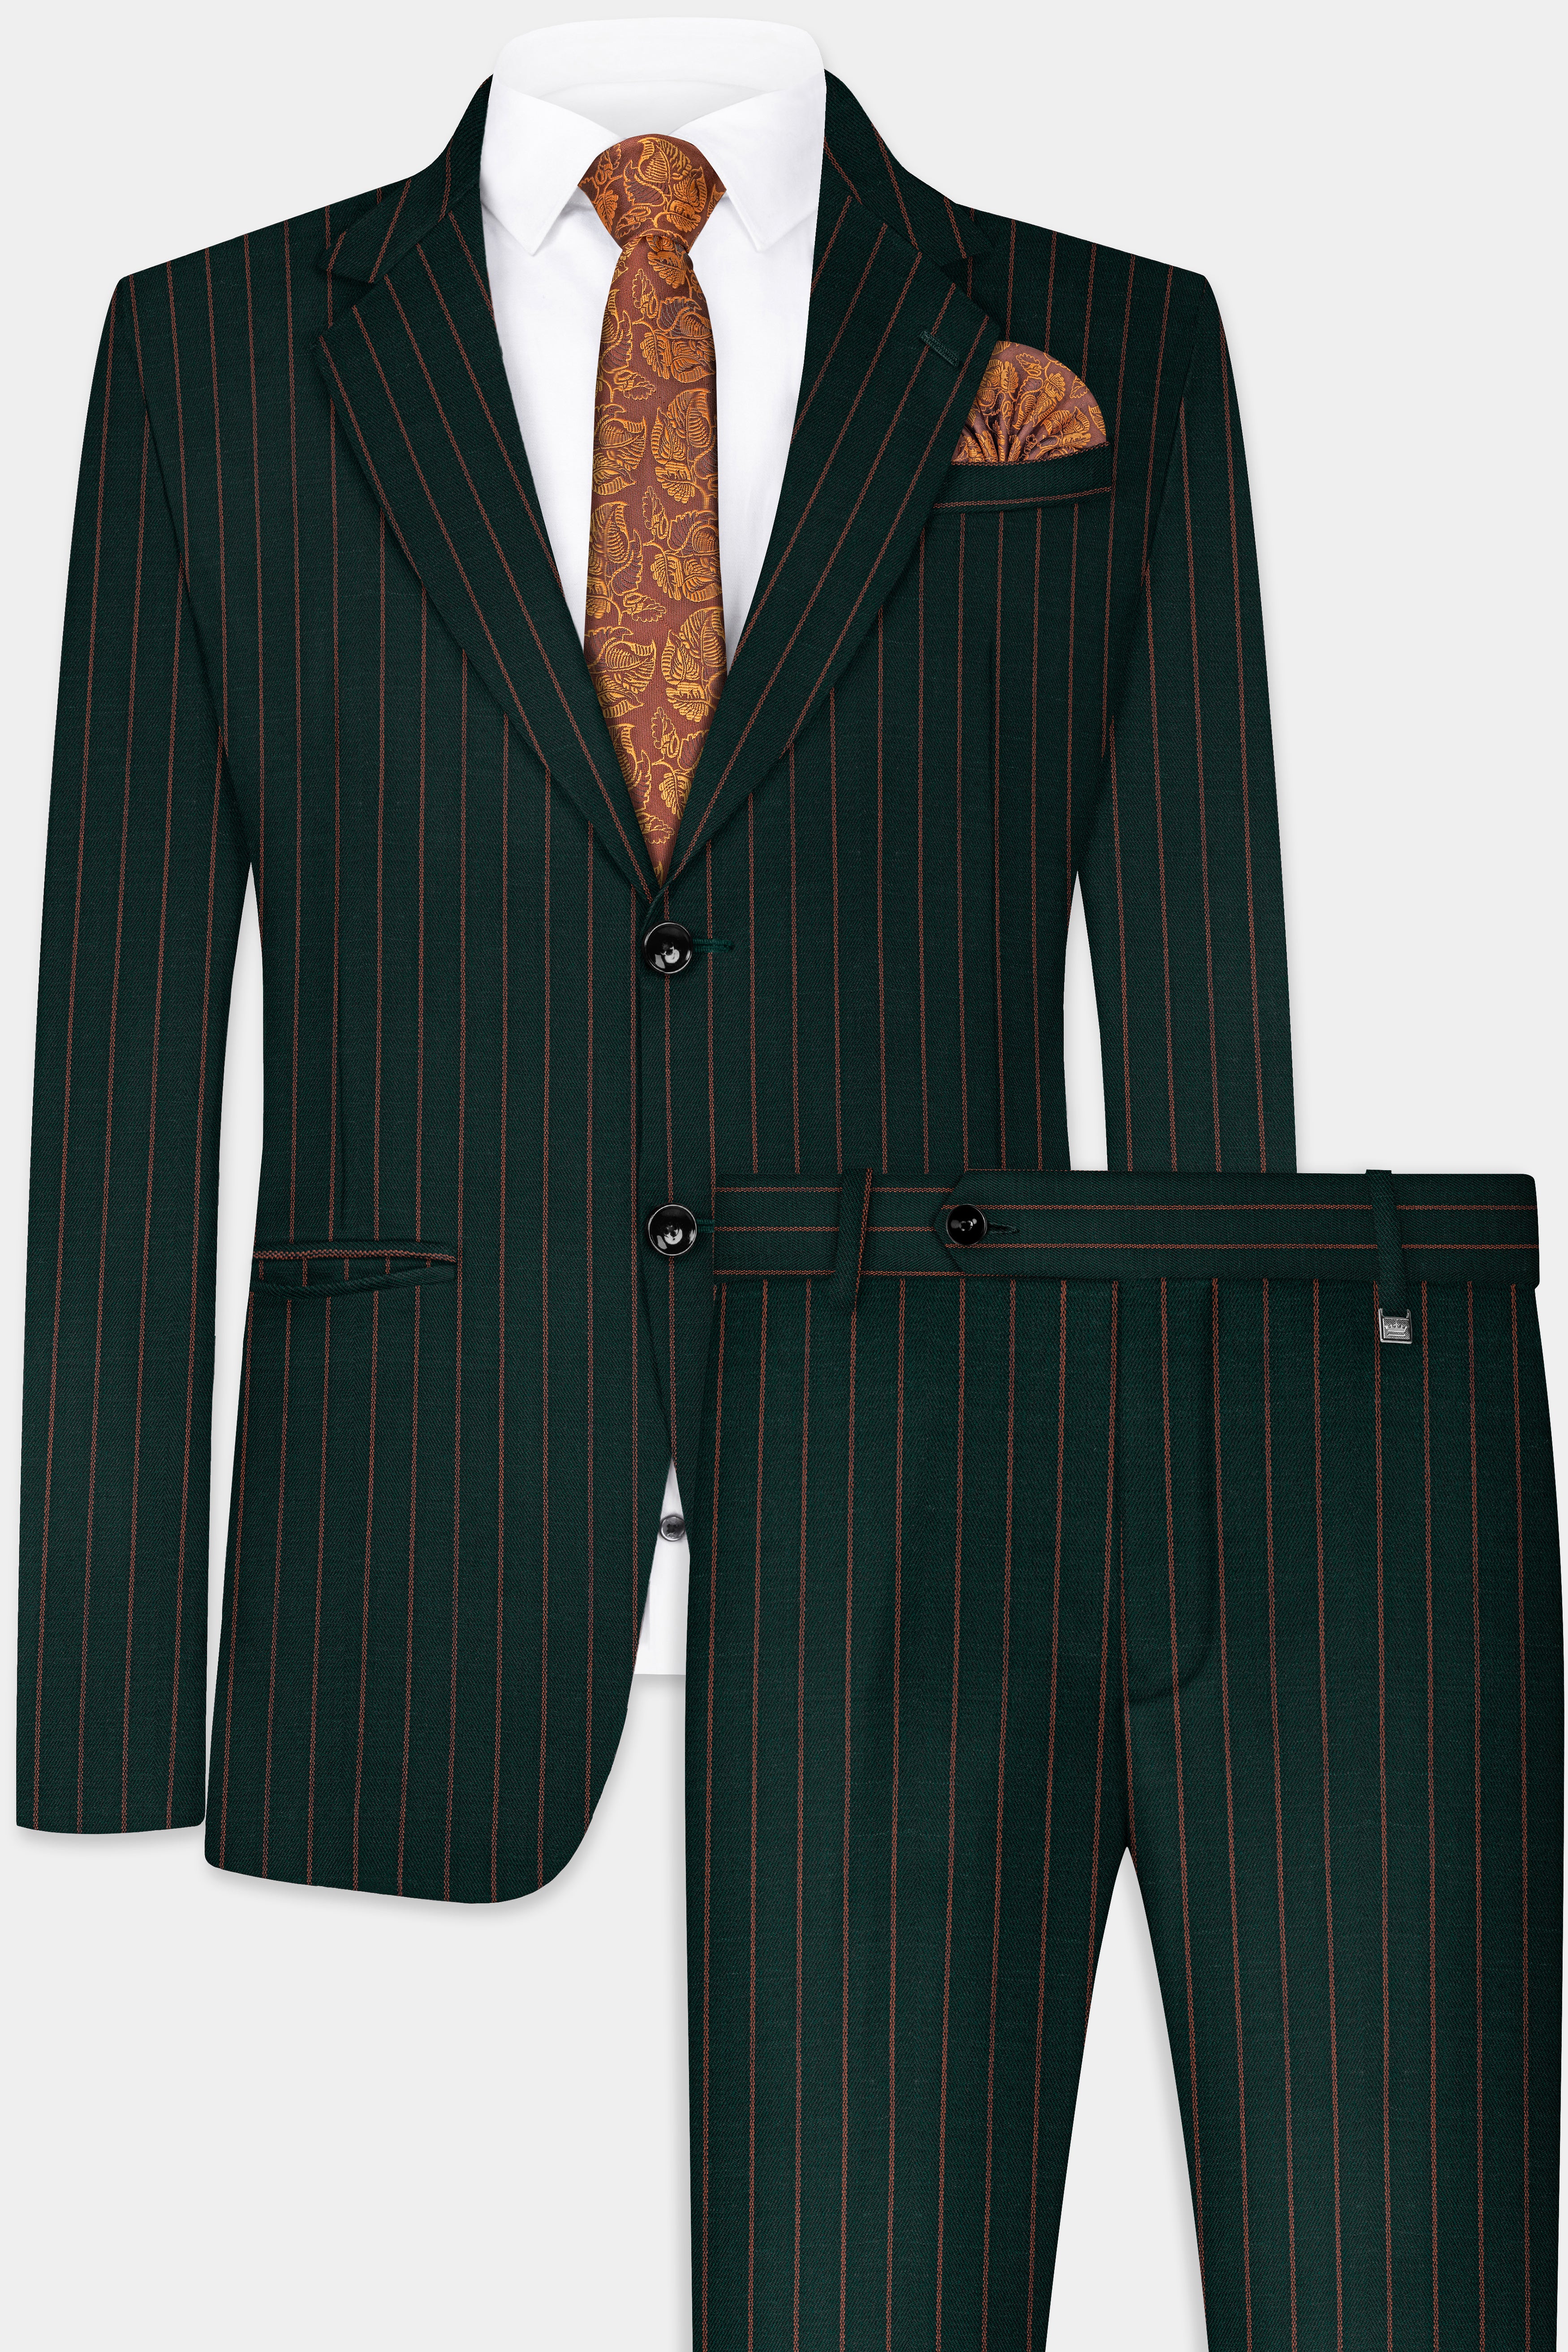 Swamp Green Striped Wool Blend Suit